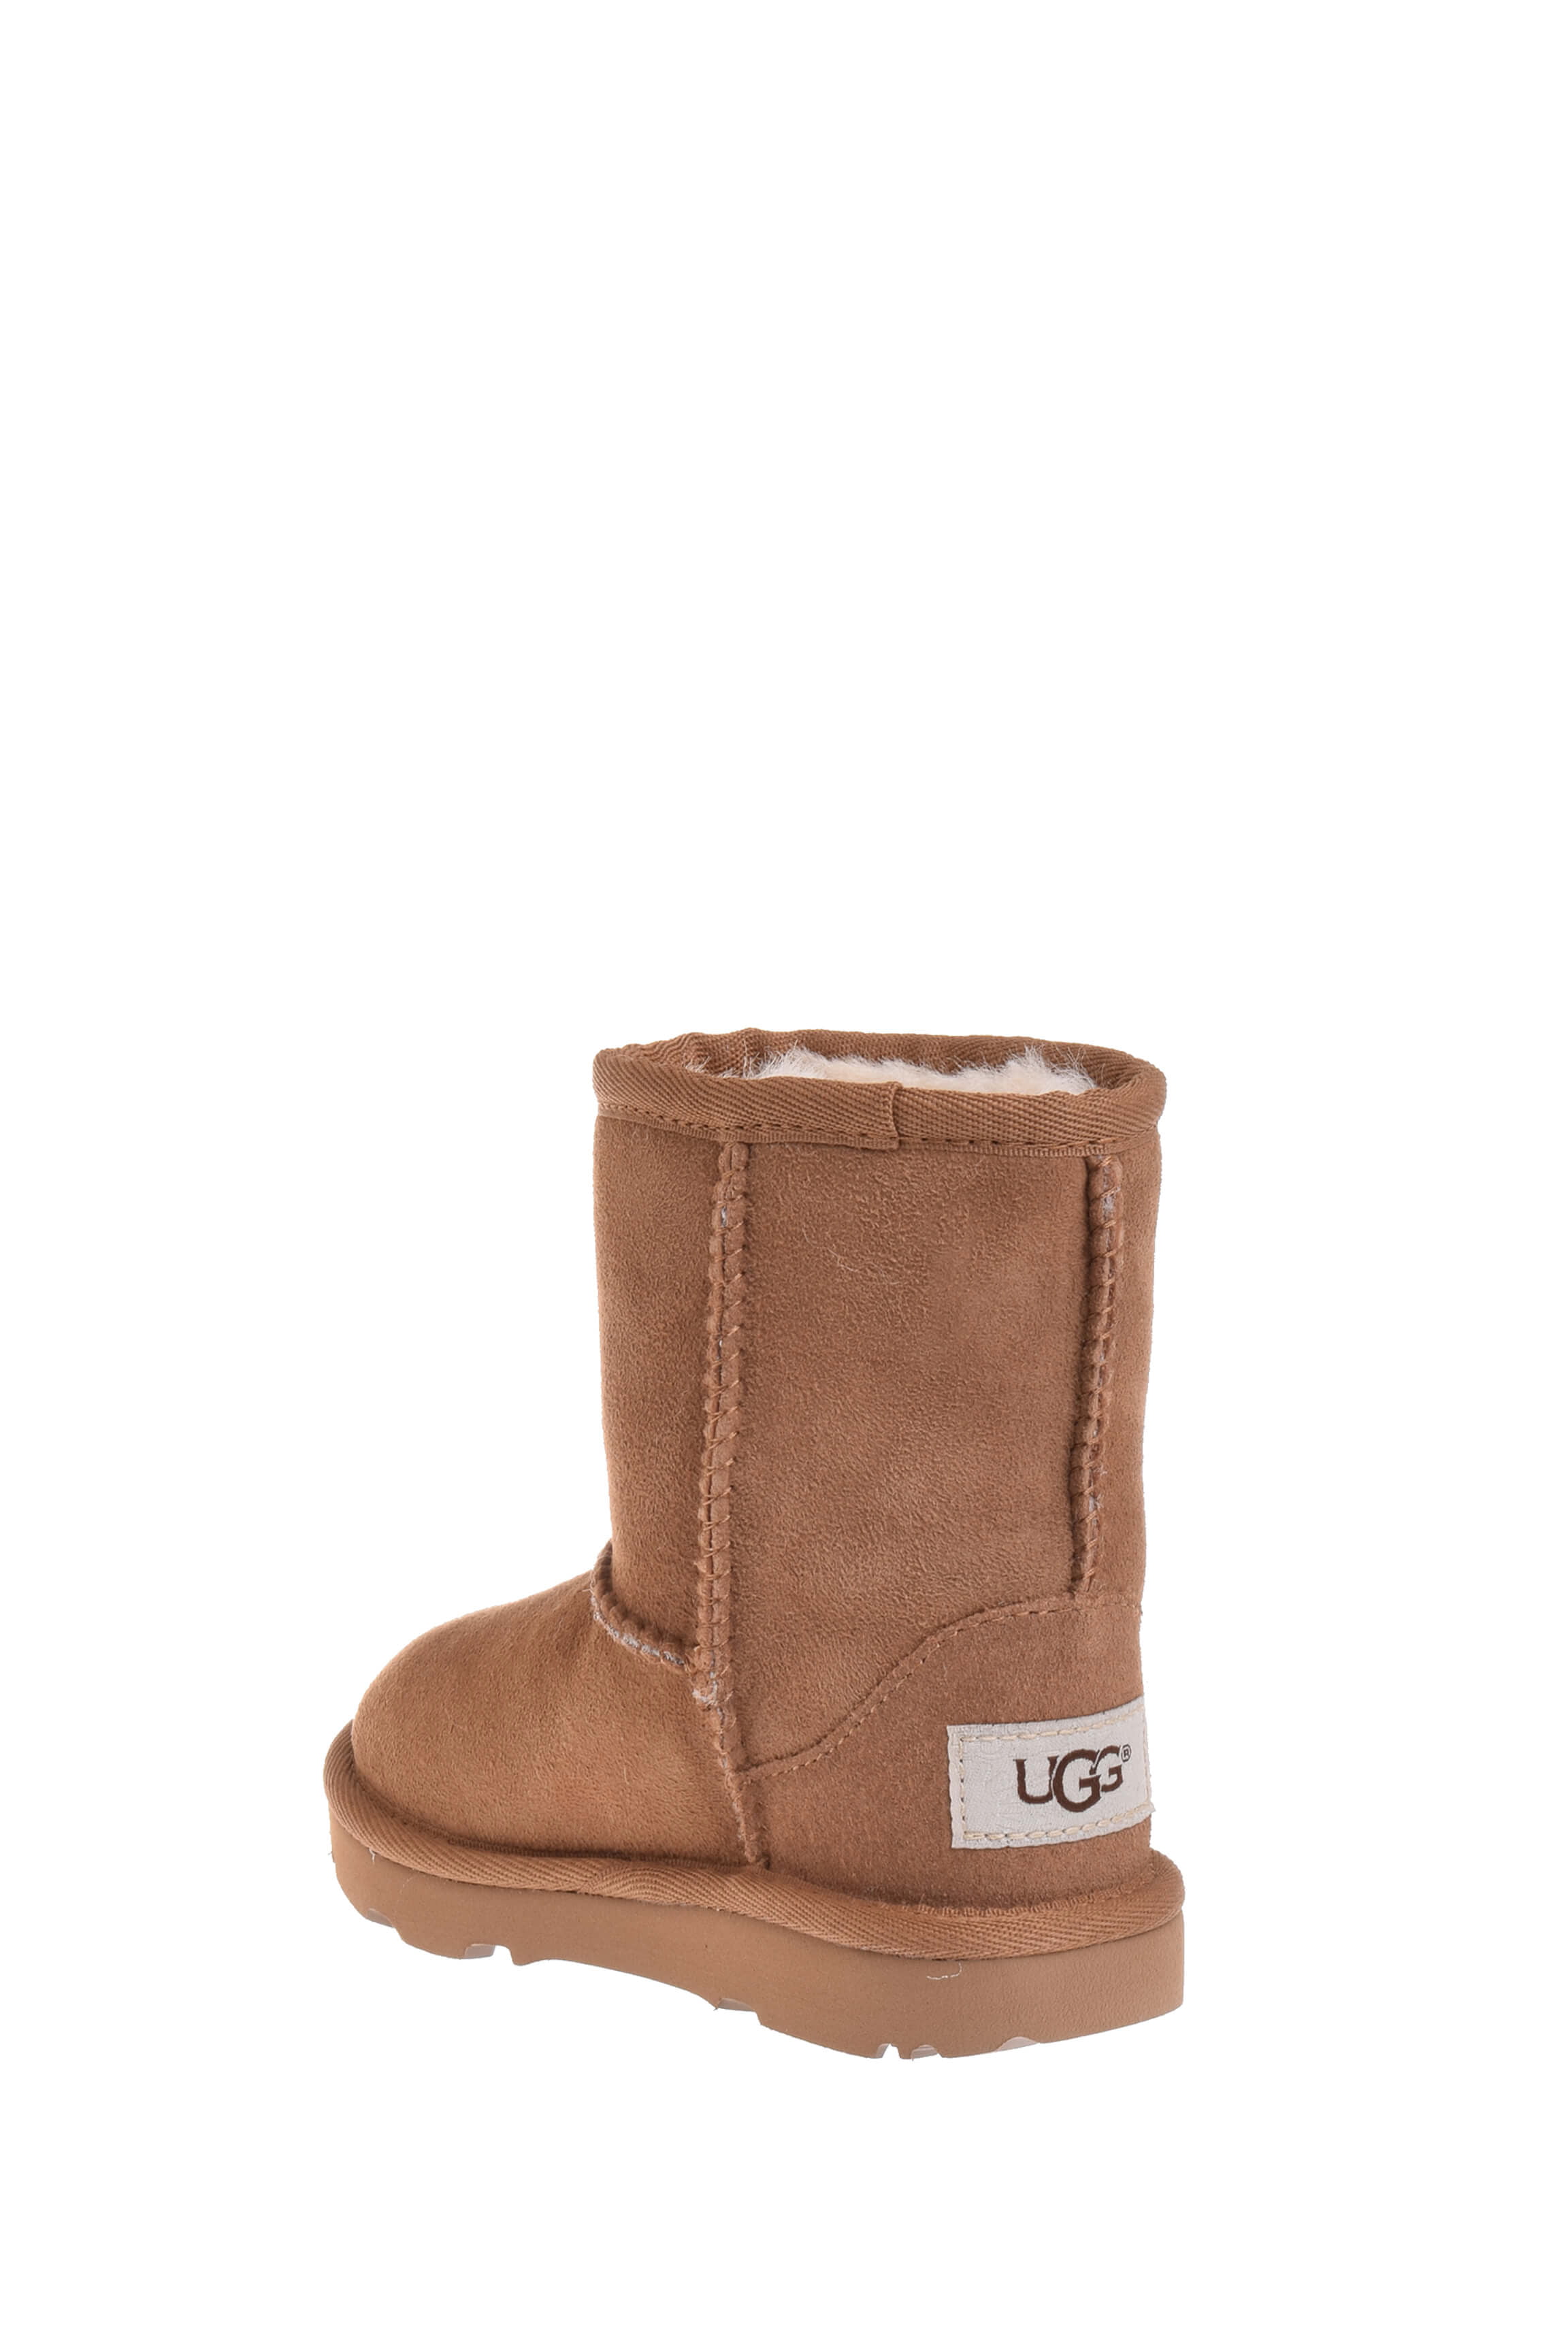 infant ugg boots clearance